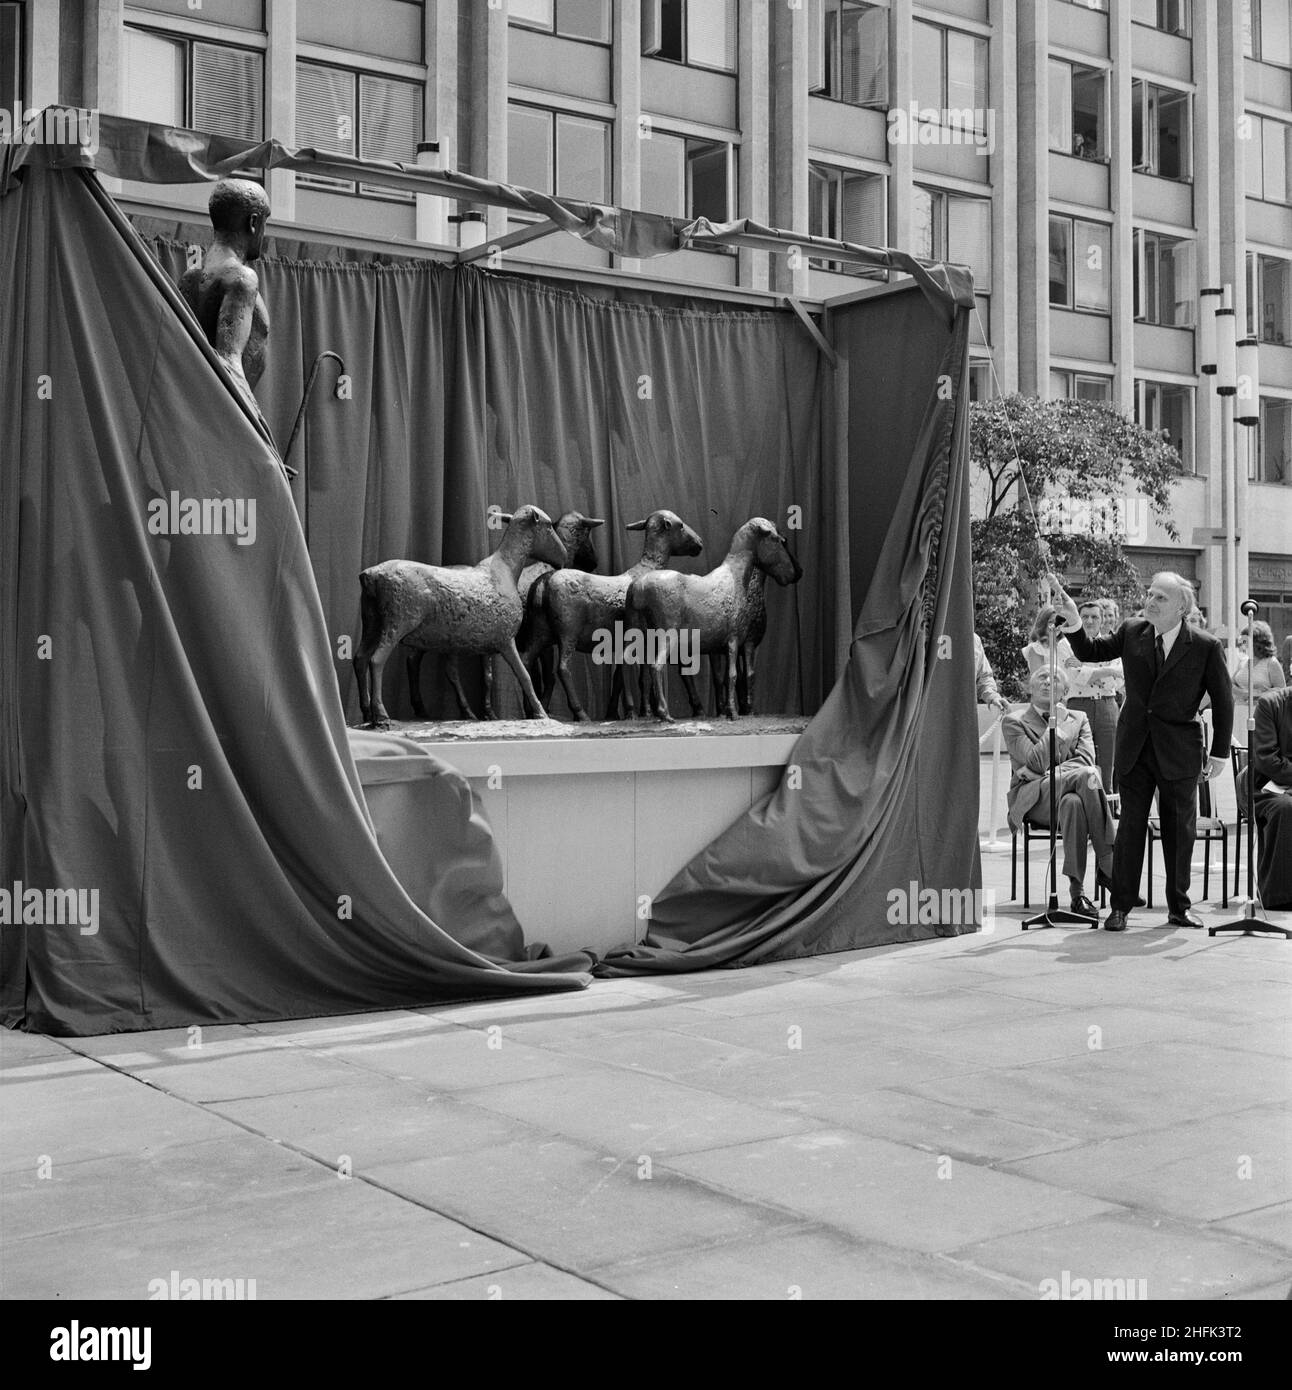 Paternoster Square, City of London, 30/07/1975. Violinist Yehudi Menuhin unveiling a bronze sculpture of a shepherd and his sheep by Elisabeth Frink at the Paternoster development. Work on the Paternoster development in the 1960's was carried out in a joint venture by John Laing Construction Limited, Trollope and Colls Limited, and George Wimpey and Company Limited. The development consisted of a series of office blocks, a shopping precinct, an extensive piazza and a three-level car park. In July 1975, a bronze statue of a shepherd and his sheep, sculpted by Elisabeth Frink, was unveiled at th Stock Photo